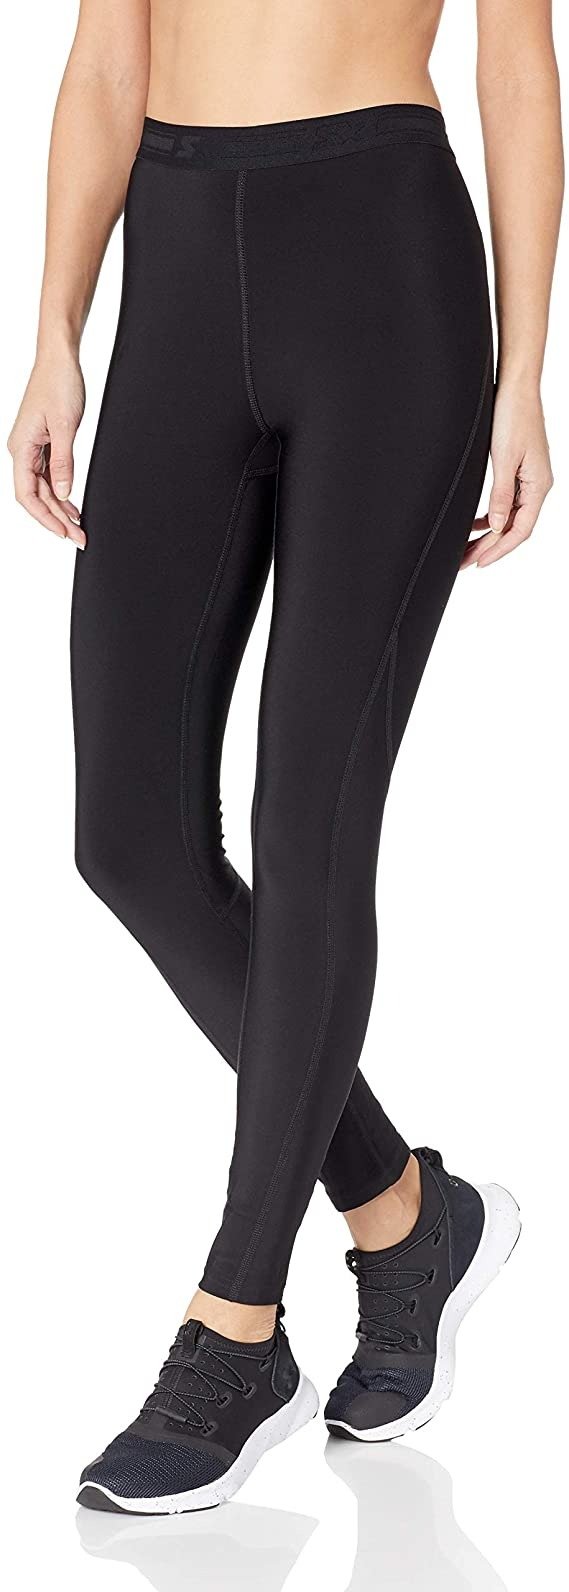 Women's 27" Therma-Star Brushed Compression Leggings, Amazon Exclusive